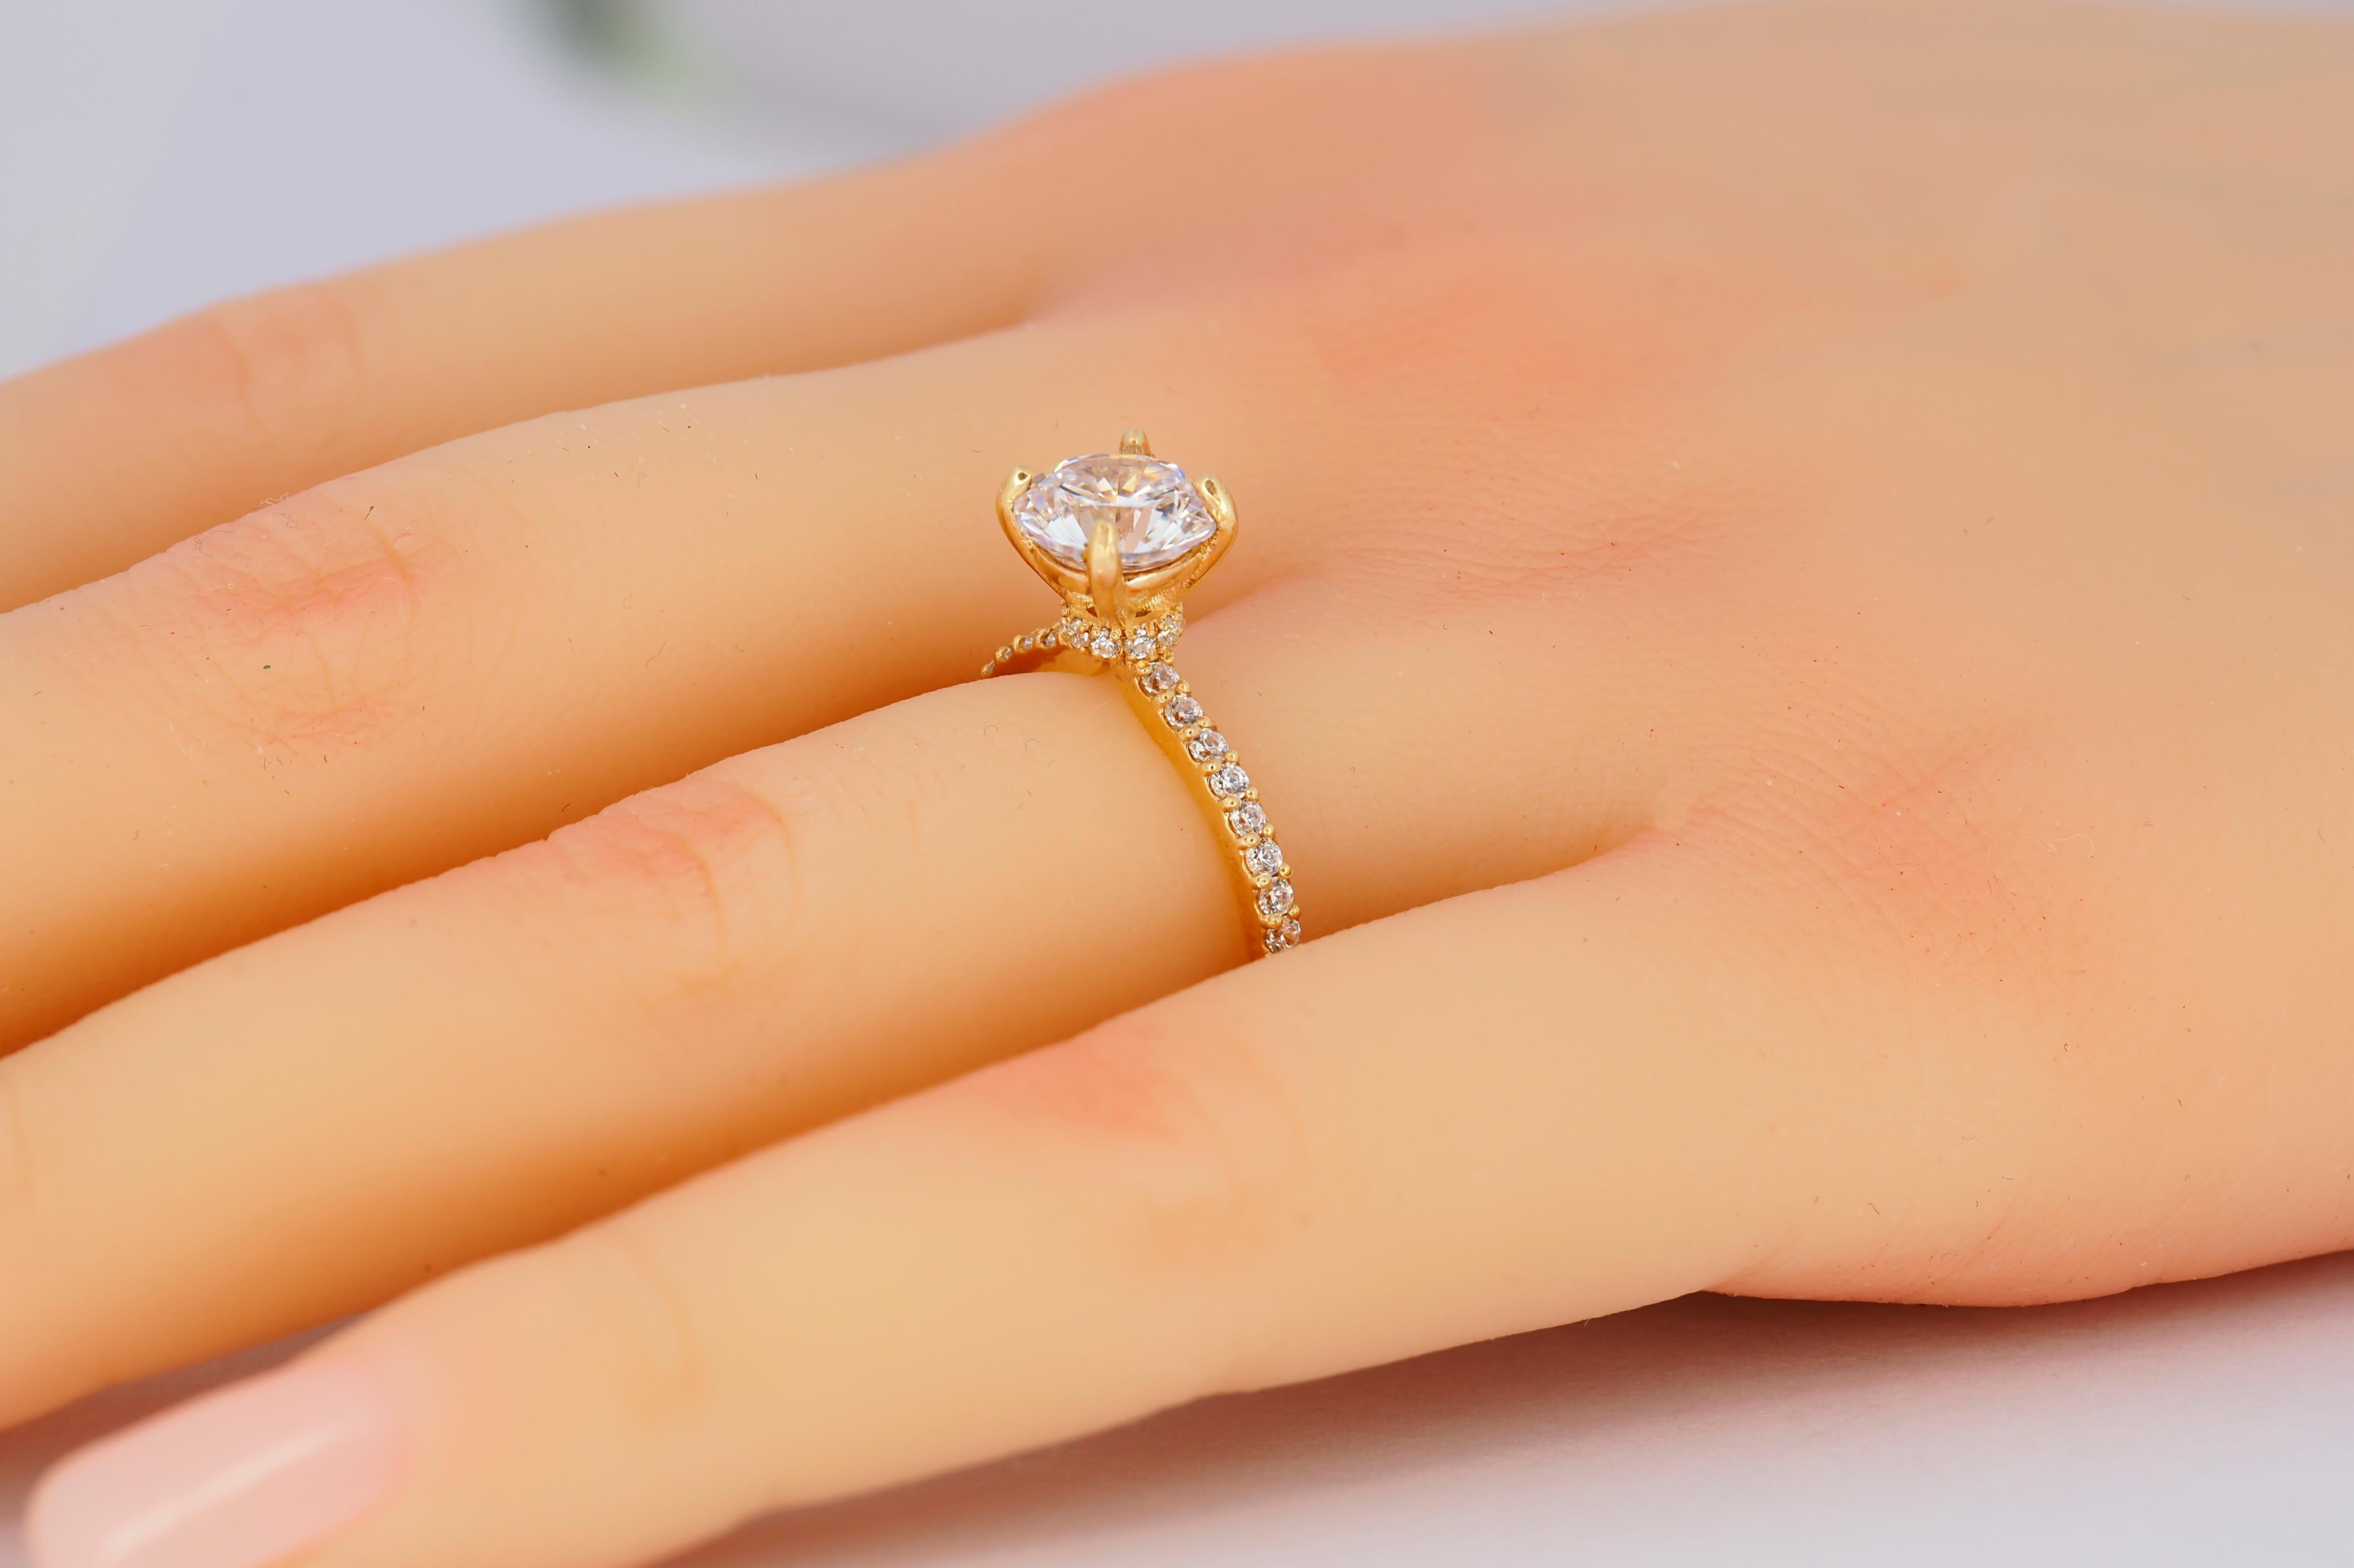 For Sale:  The Veiled Halo Round Brilliant Moissanite Engagement 14k Gold Ring.  10